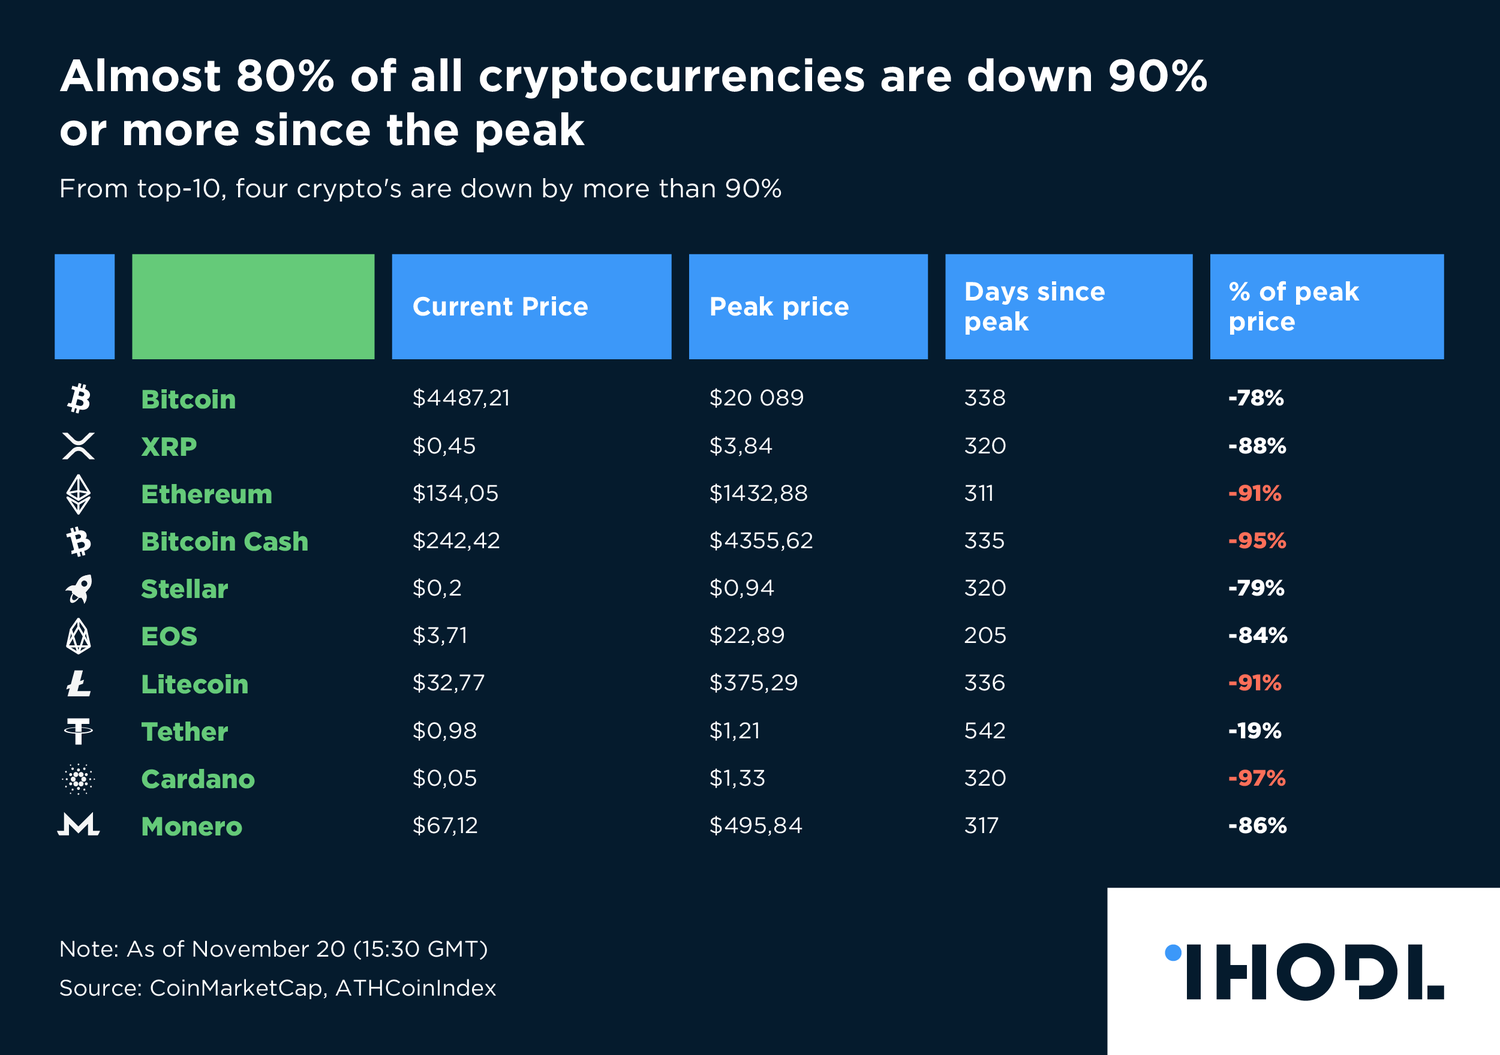 compare all cryptocurrencies